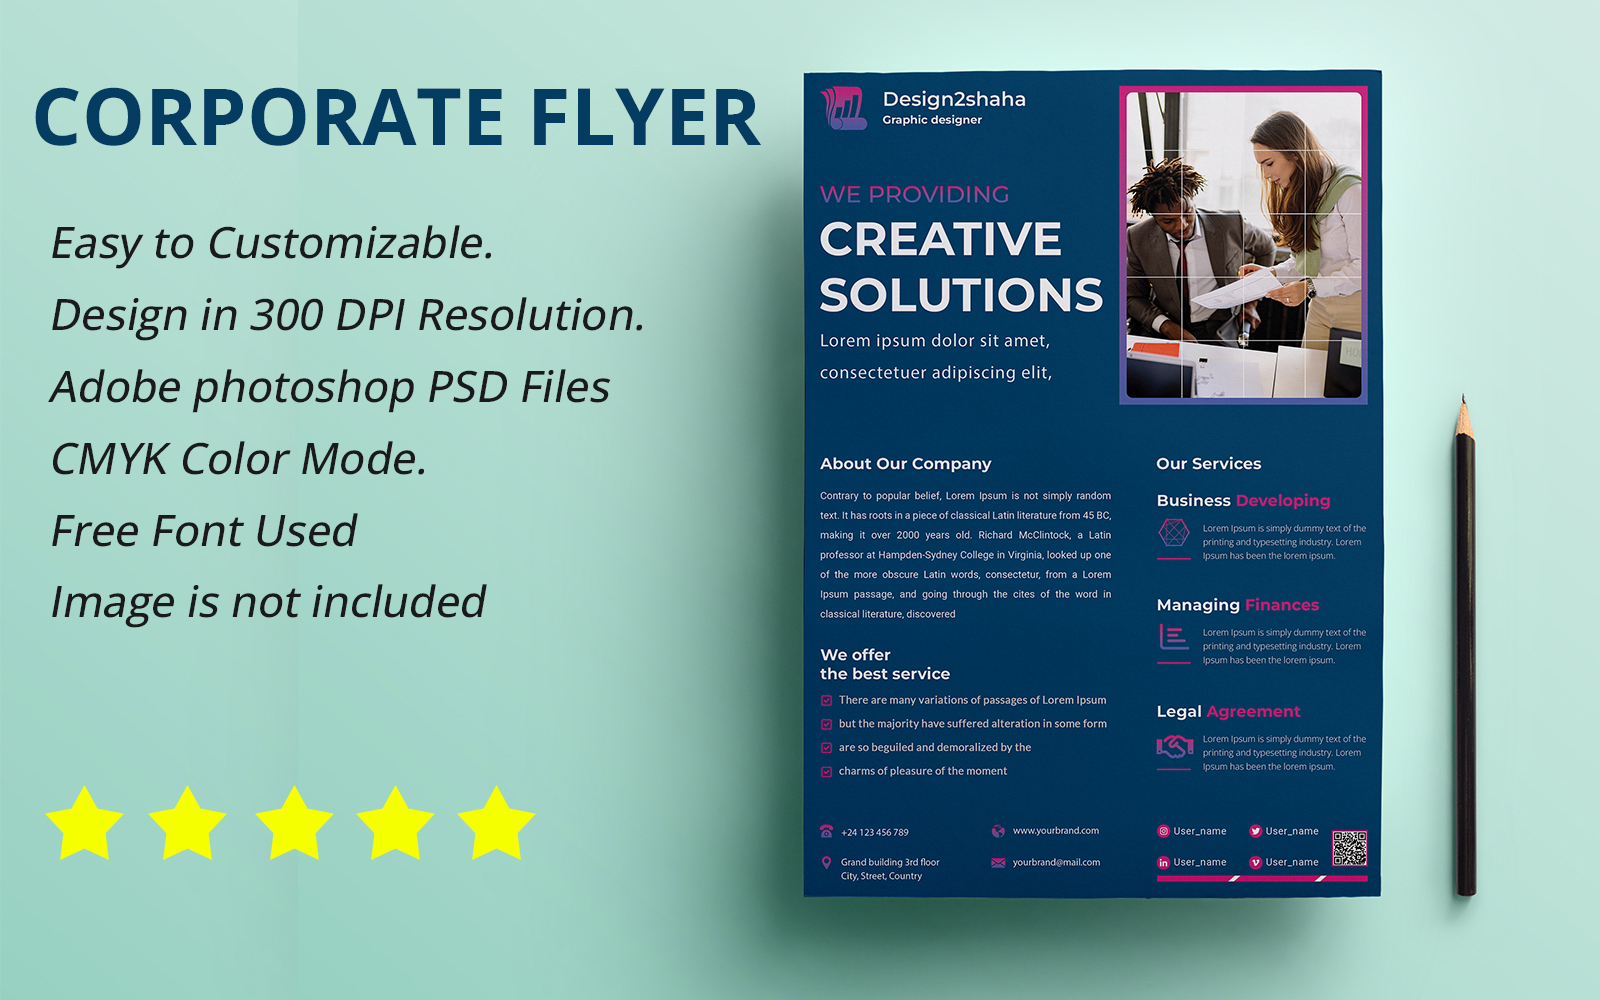 Corporate Flyer Template Print ready Sk-02